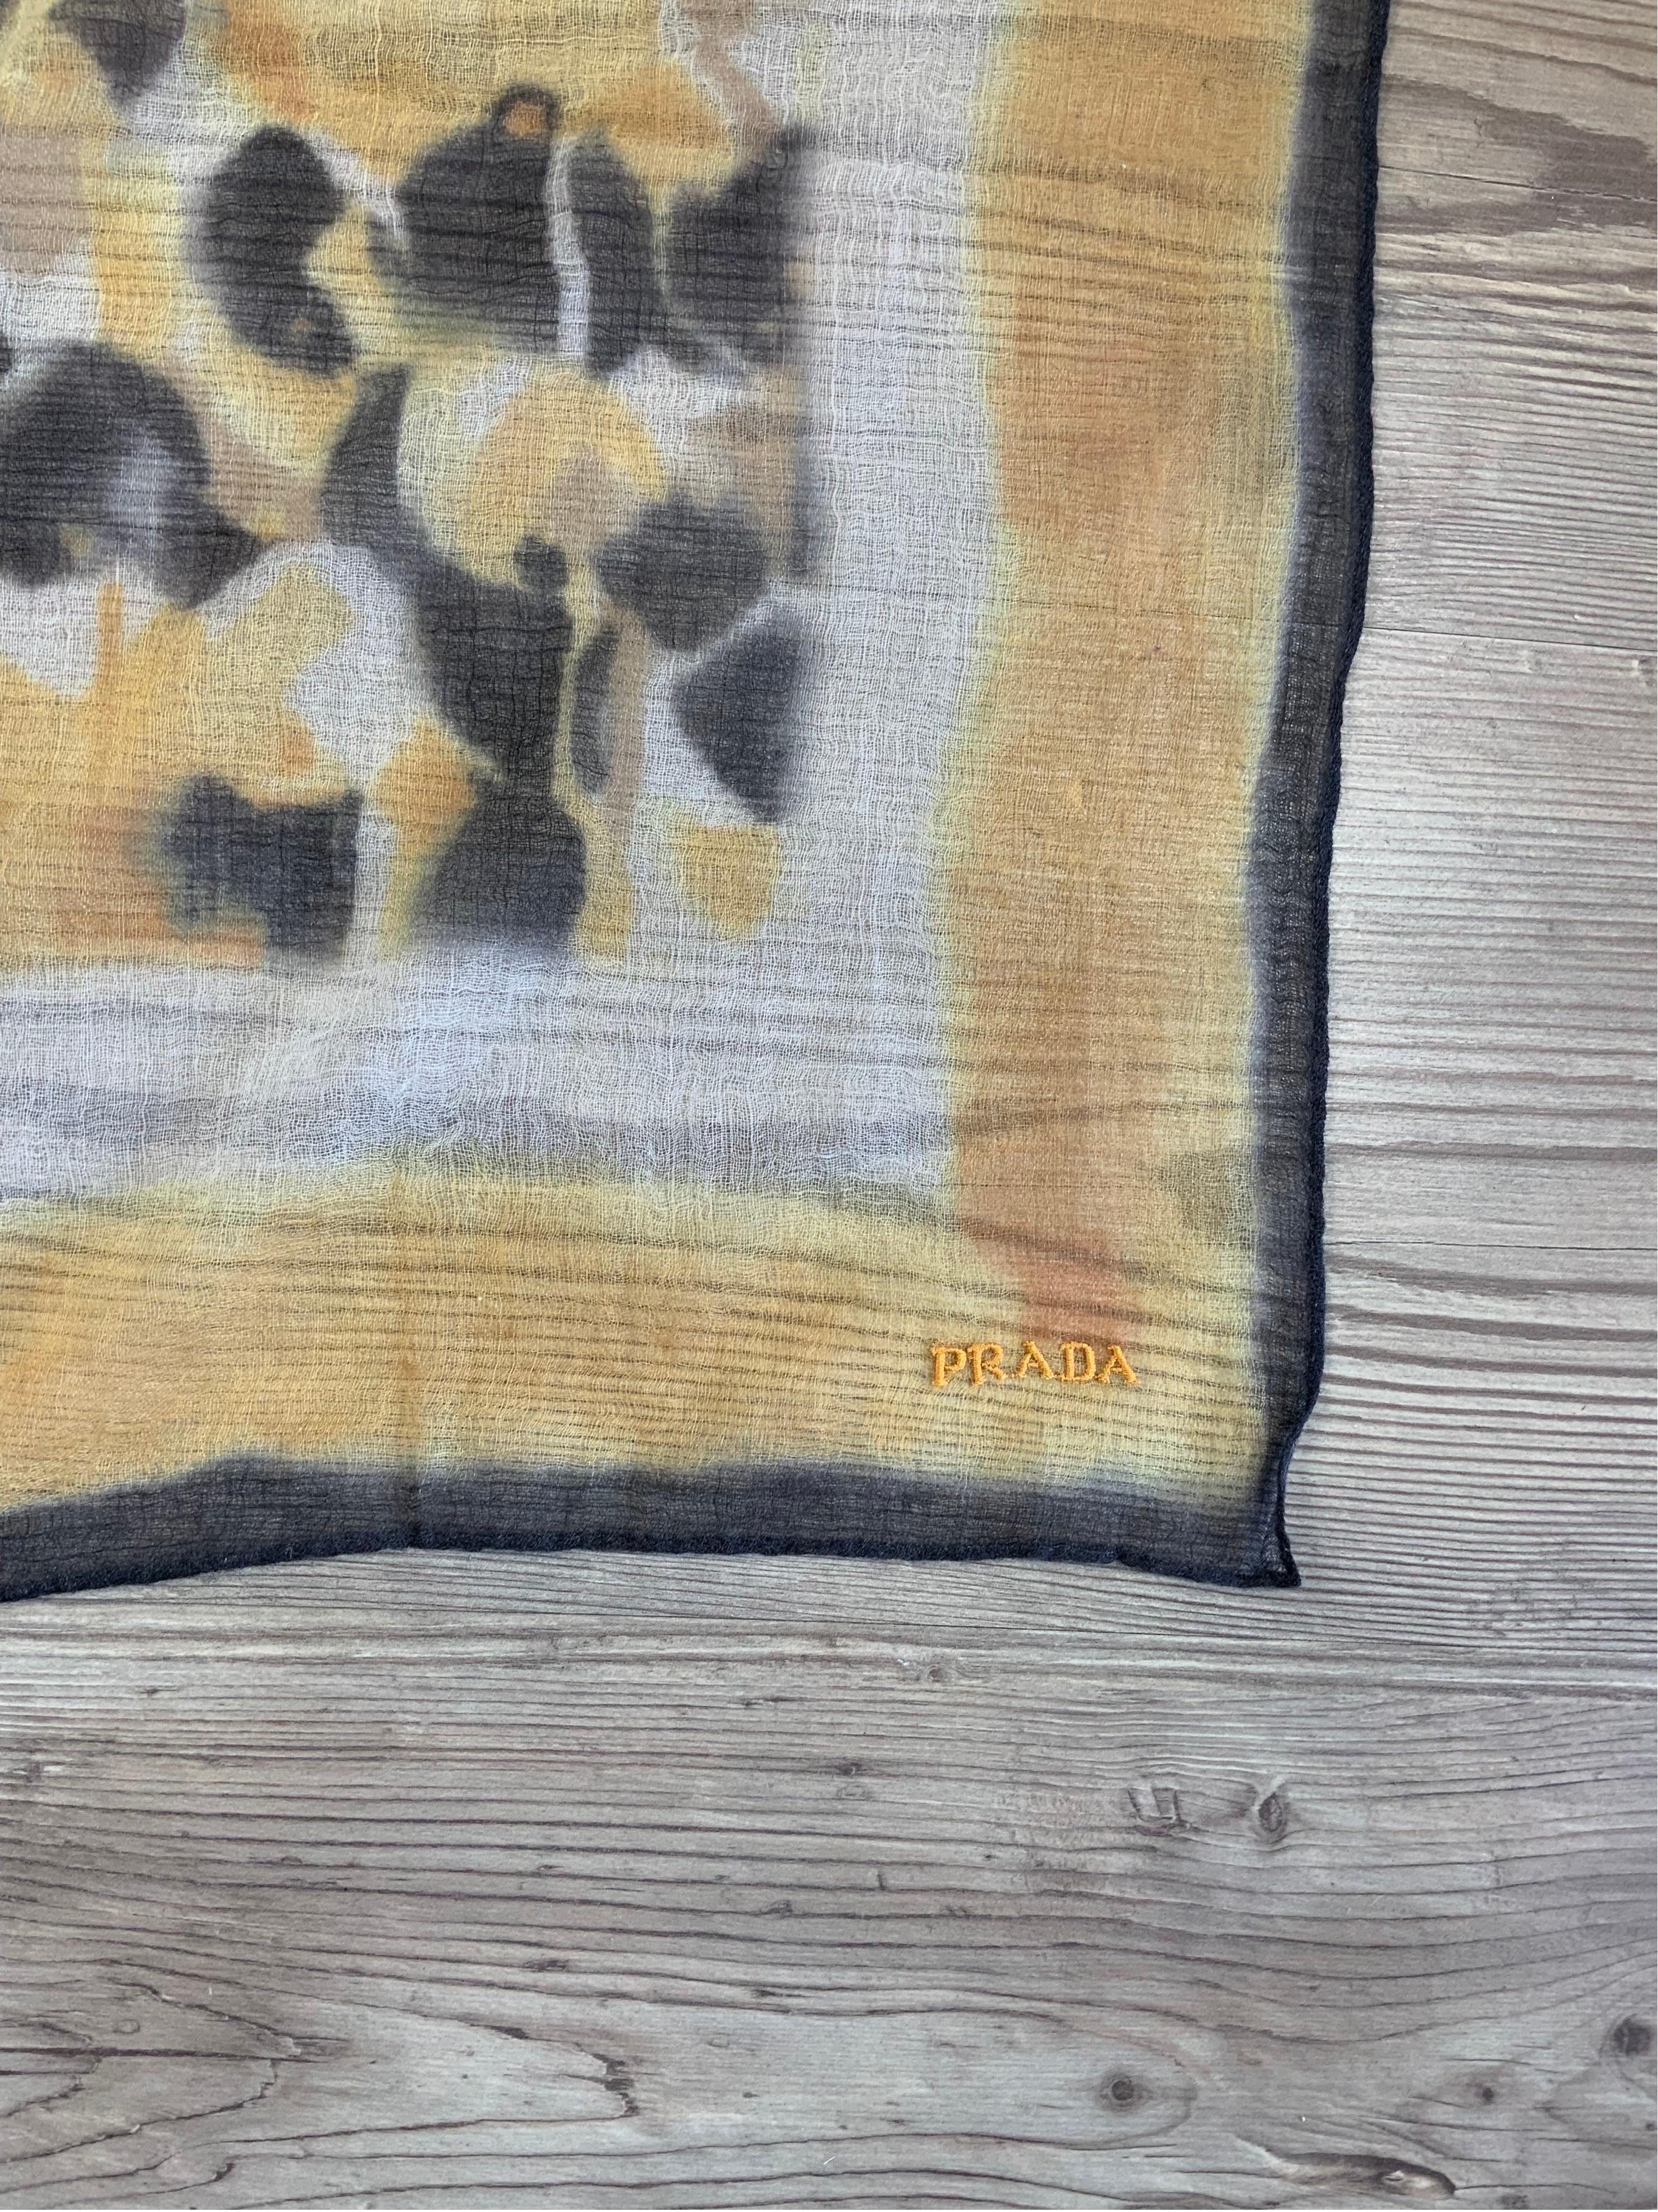 Prada Foulard.
100% cashmere. Very soft and very delicate material.
Measures 116 cm X 112 cm
Excellent general condition, it has a couple of tiny holes due to the pulled threads , as you can see in the photos.